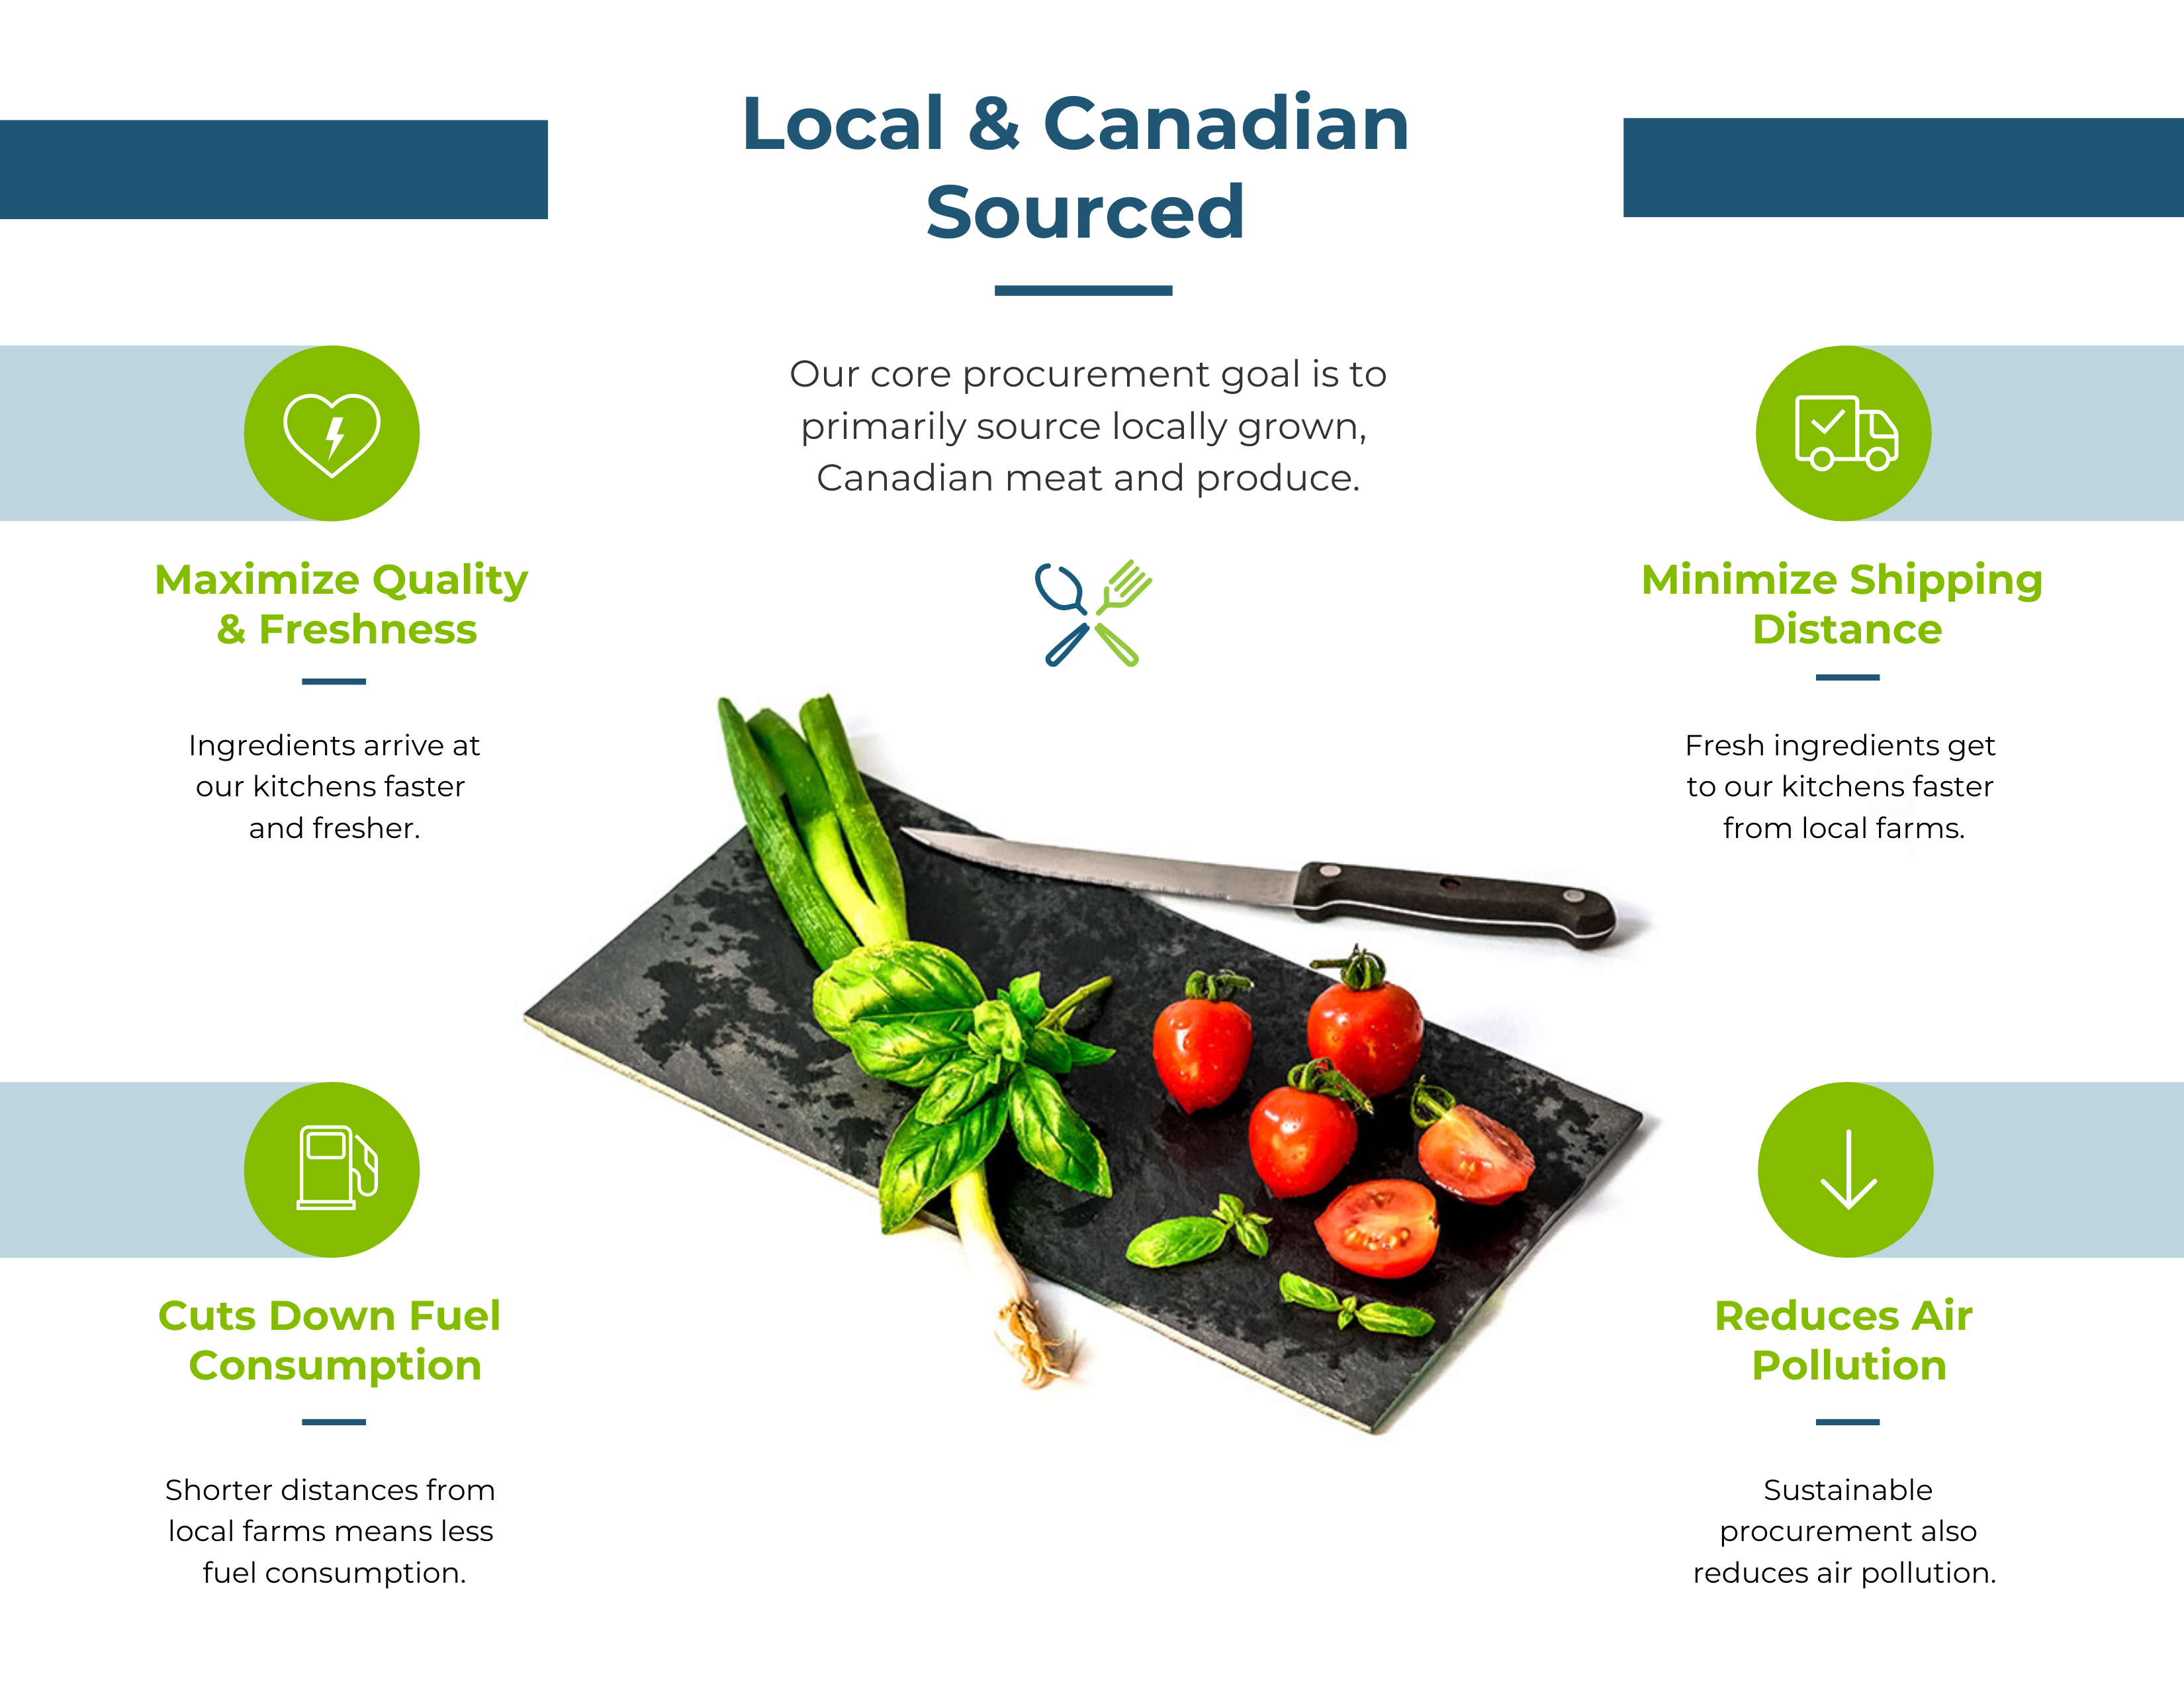 Dana's core procurement goal is to primarily source locally grown, Canadian meat and produce.